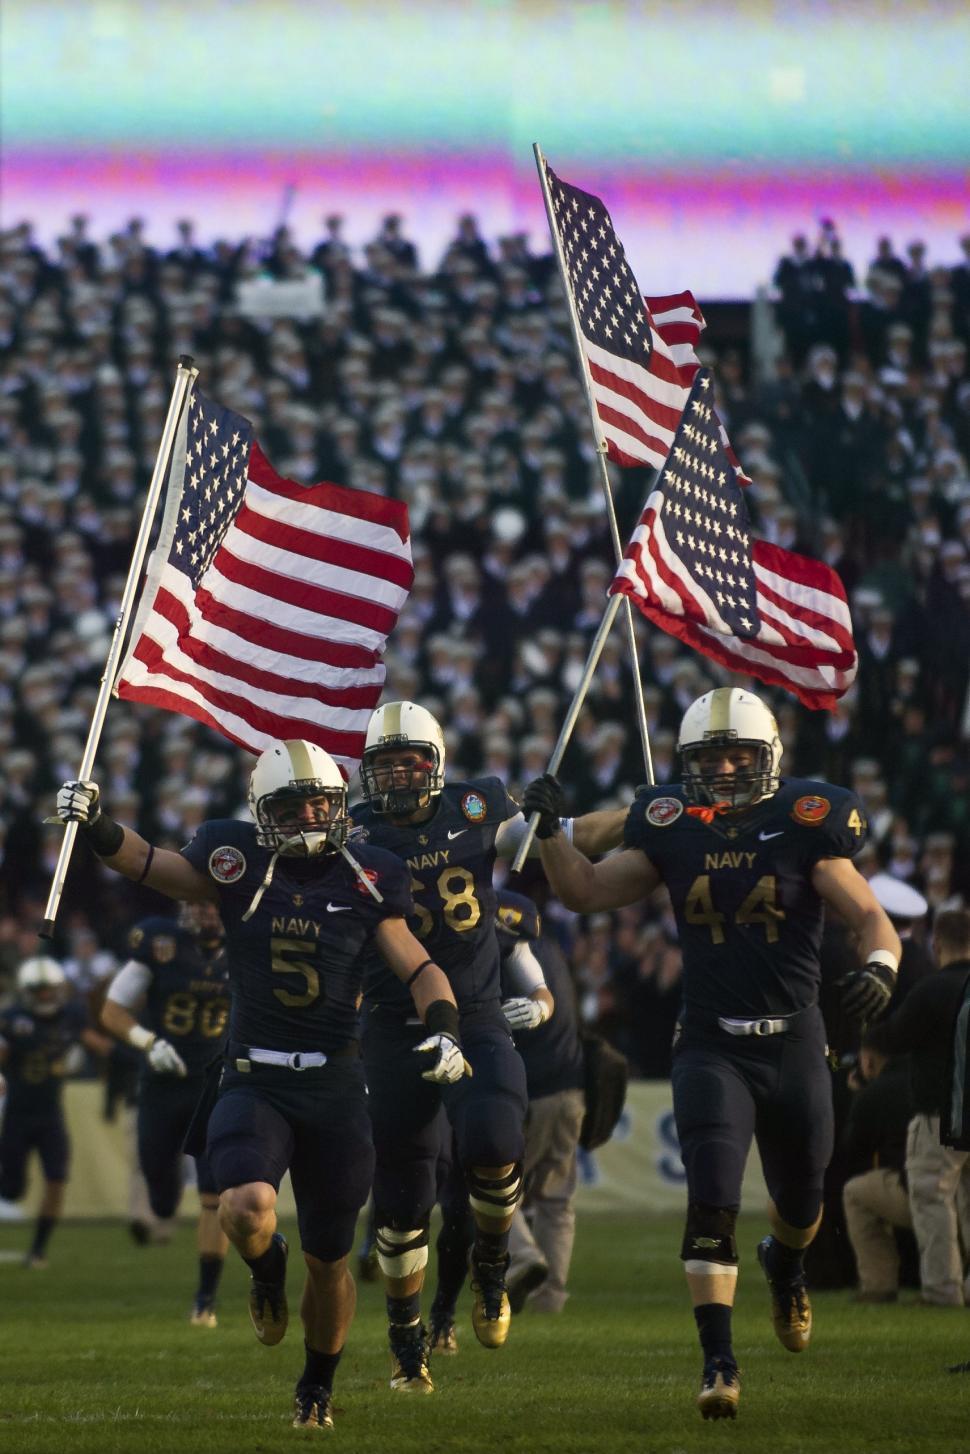 Free Image of Football Players Holding American Flags 